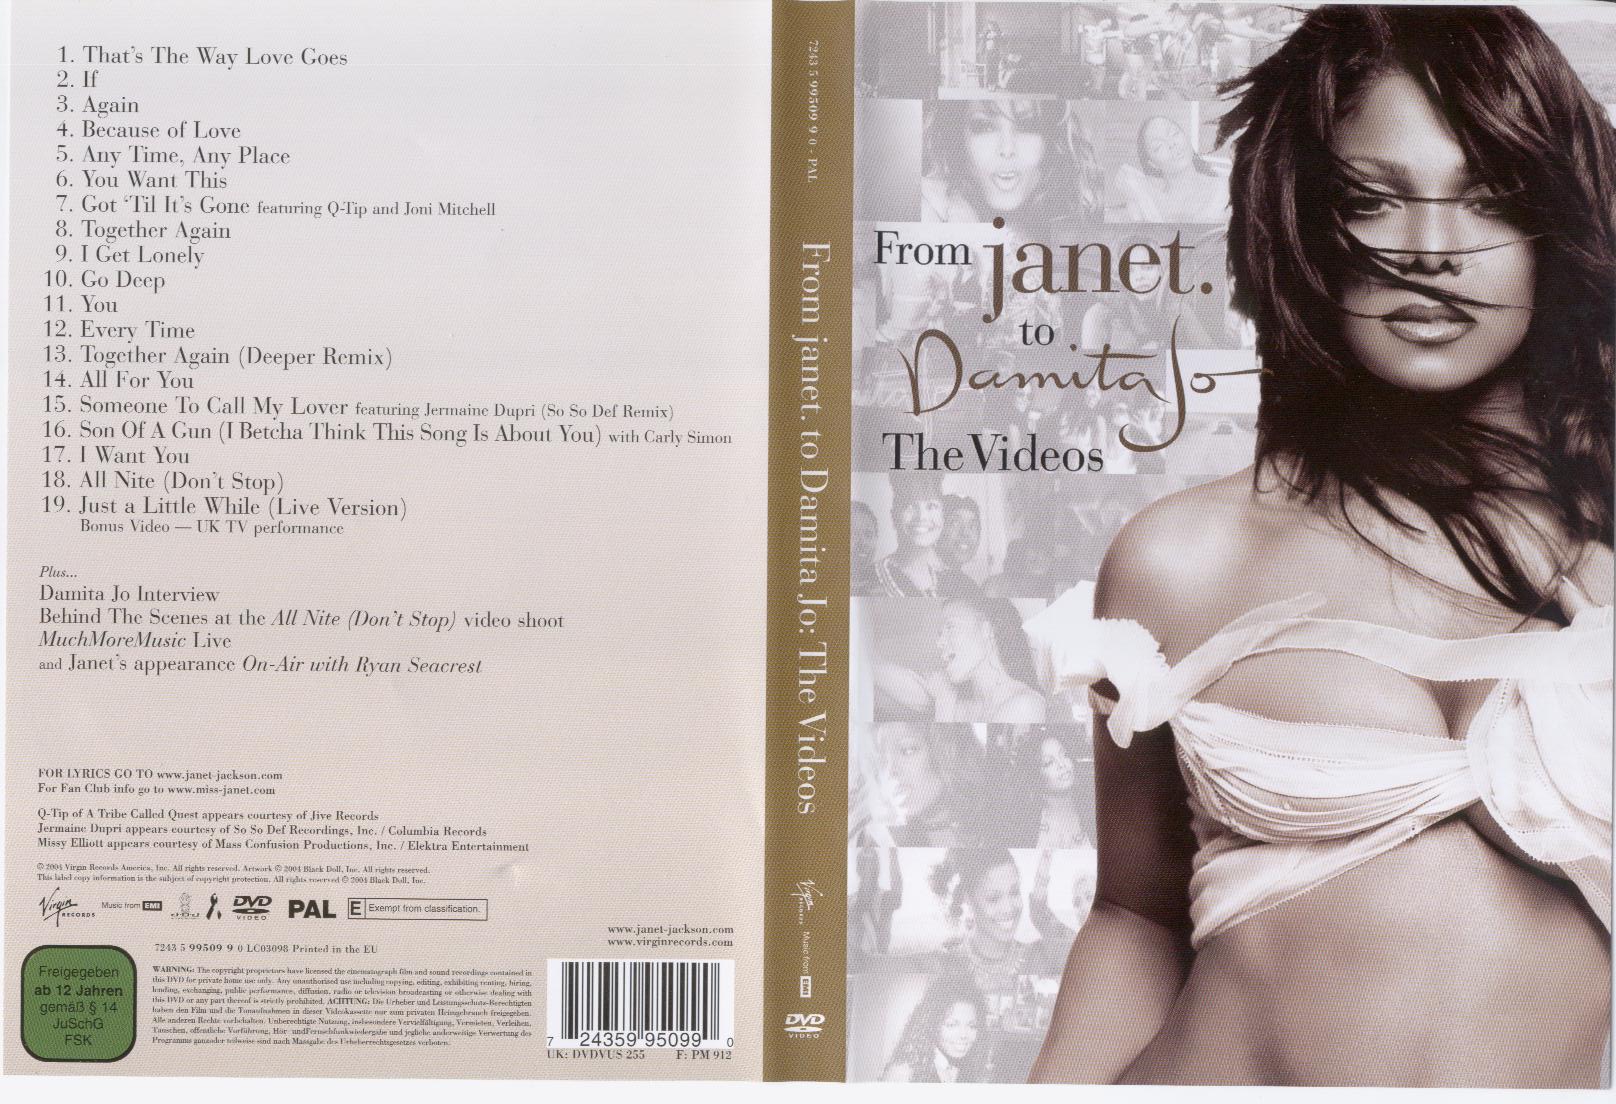 Jaquette DVD From Janet. to Damita Jo